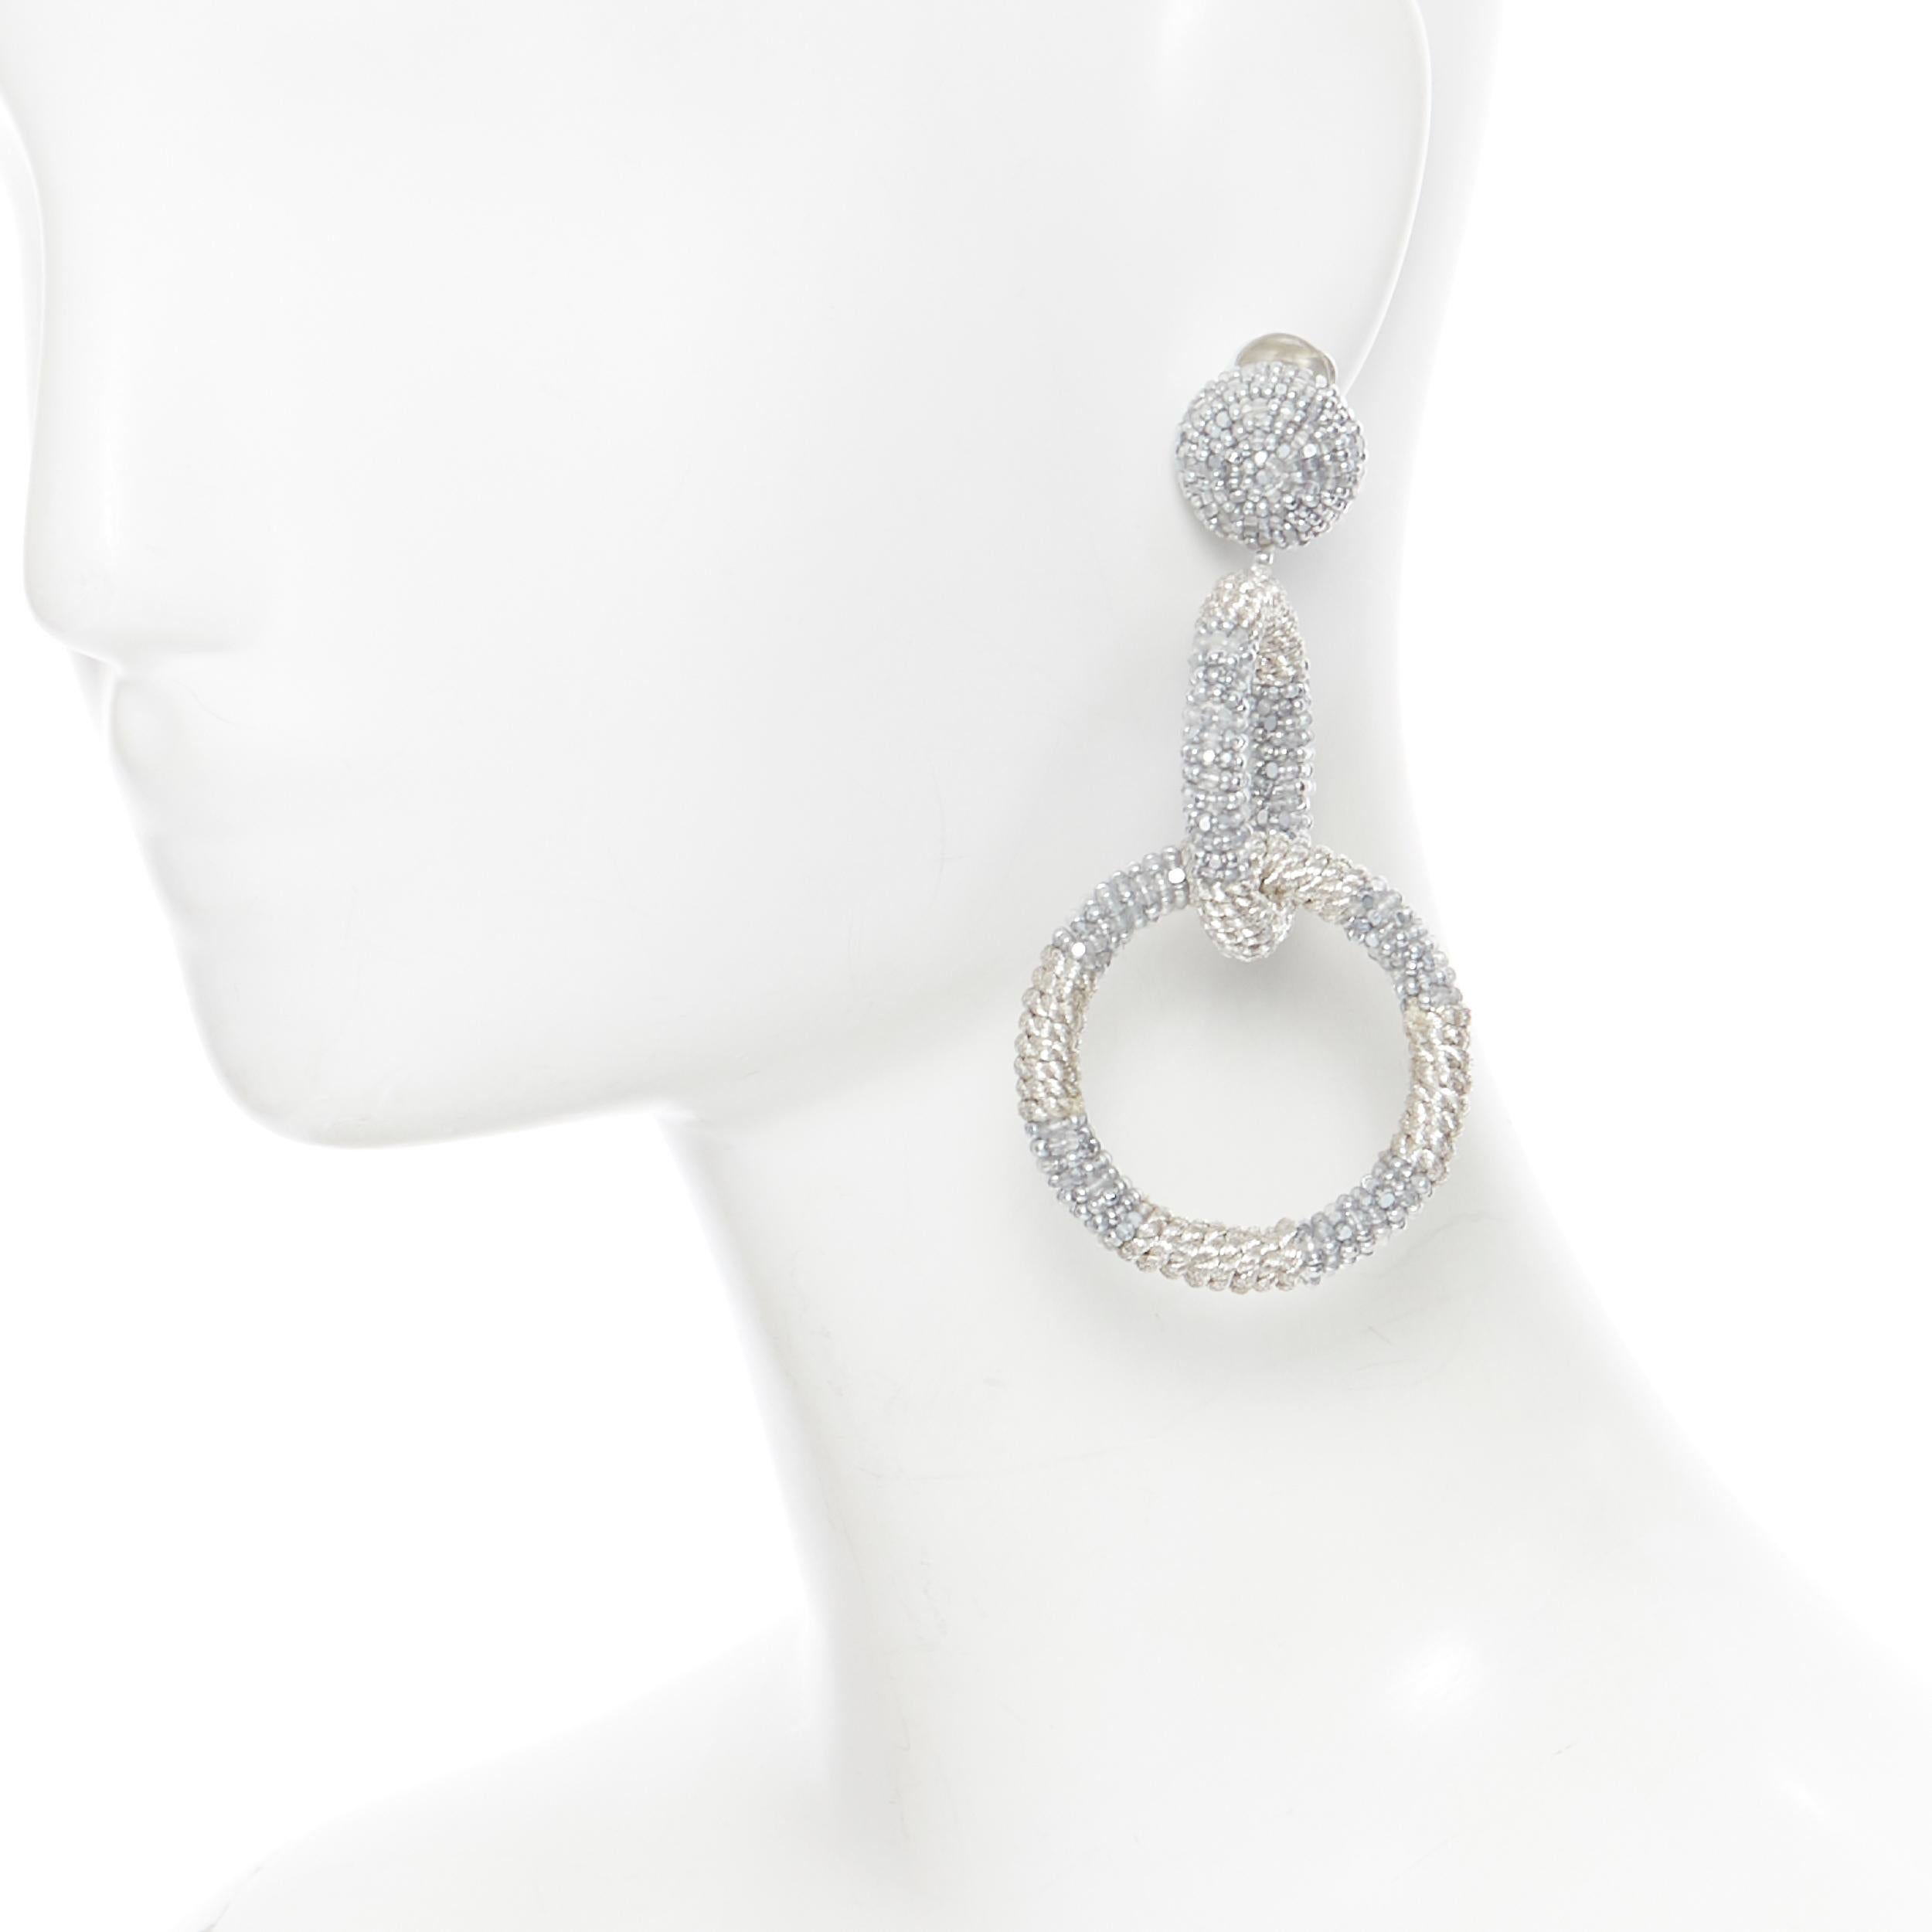 OSCAR DE LA RENTA silver bead embellished dual hoop clip on statement earring
Brand: Oscar de la Renta
Model Name / Style: Hood earring
Material: Fabric, bead
Color: Silver
Pattern: Solid
Extra Detail: Clip on earrings.

CONDITION: 
Condition: